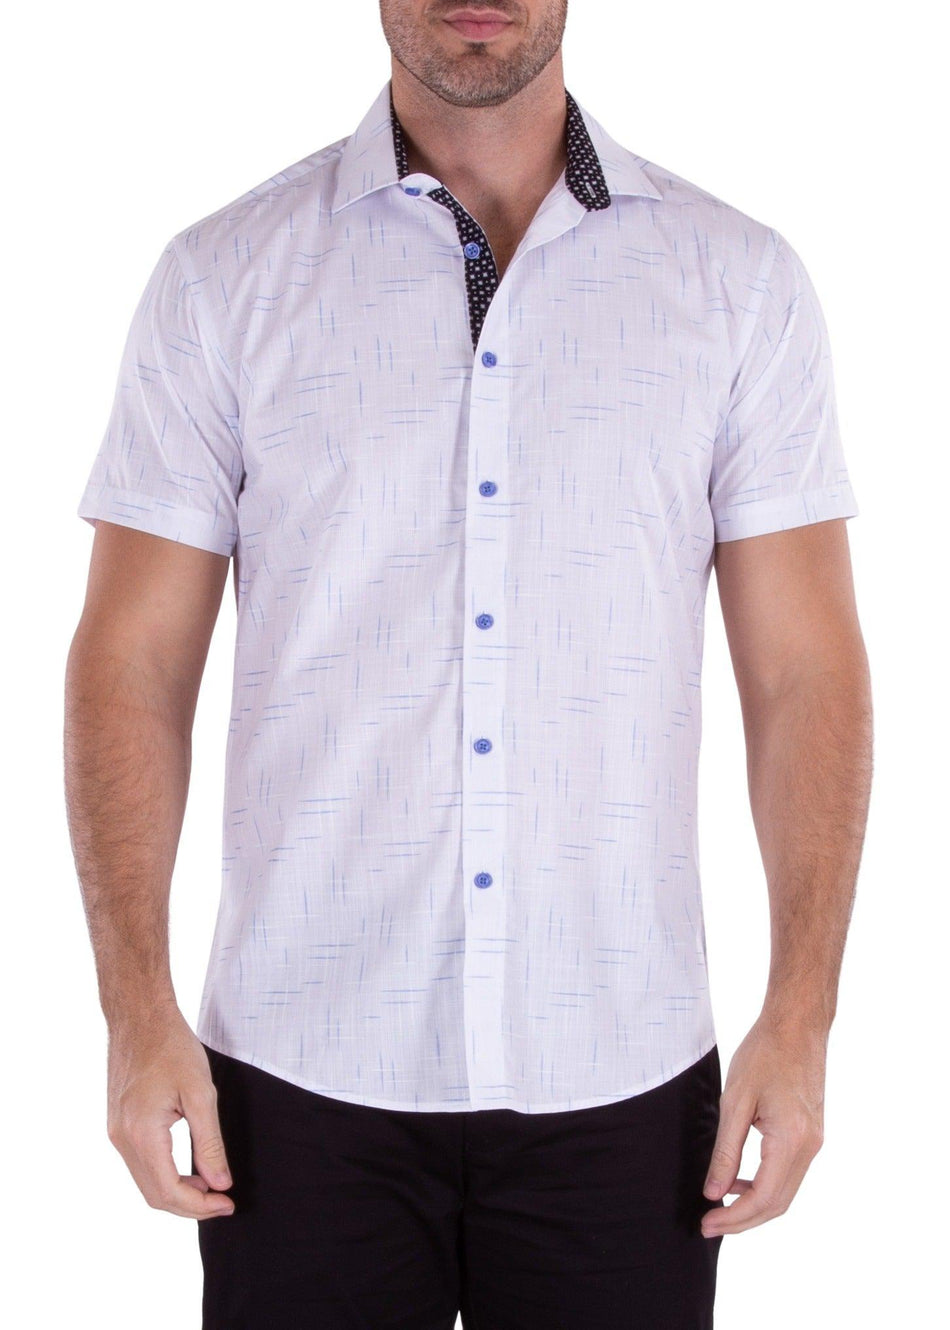 White Button Up Short Sleeve